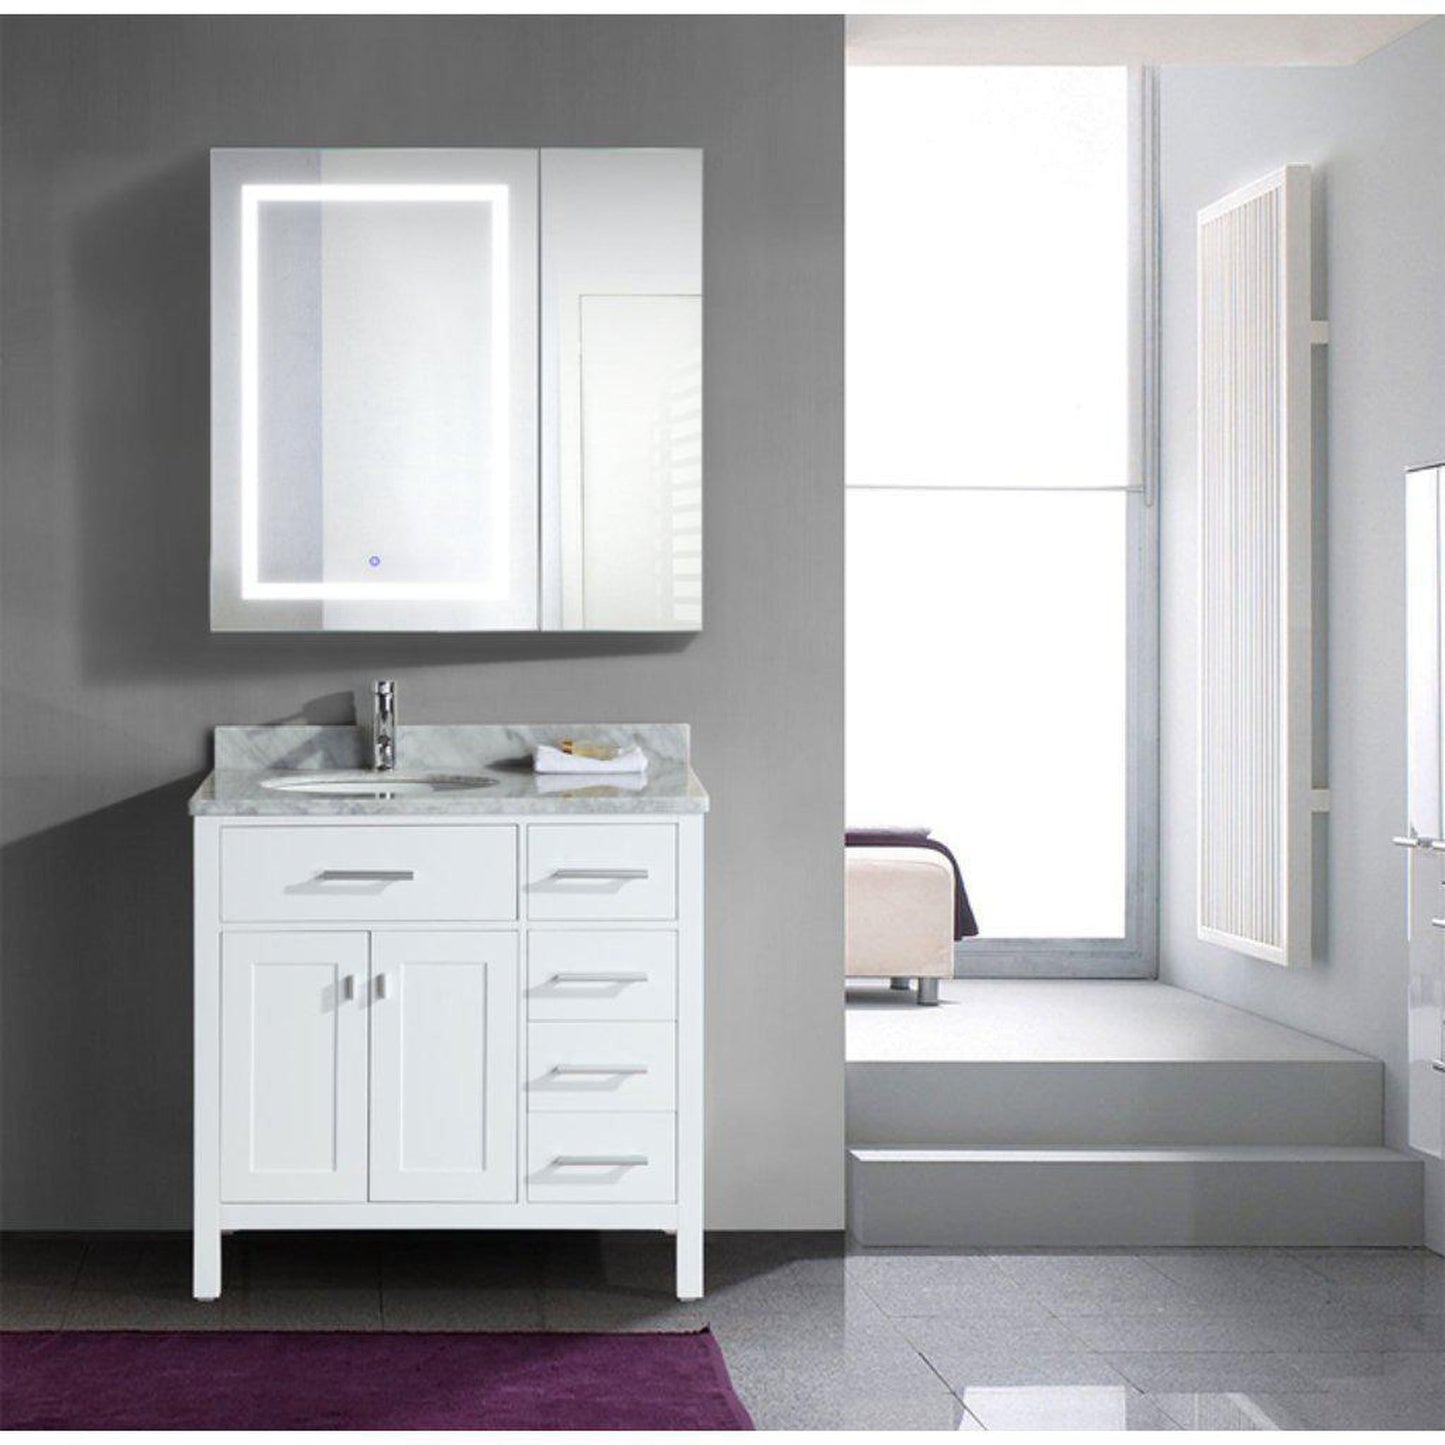 Krugg Reflections Svange 36" x 36" 5000K Single Bi-View Left Opening Recessed/Surface-Mount Illuminated Silver Backed LED Medicine Cabinet Mirror With Built-in Defogger, Dimmer and Electrical Outlet